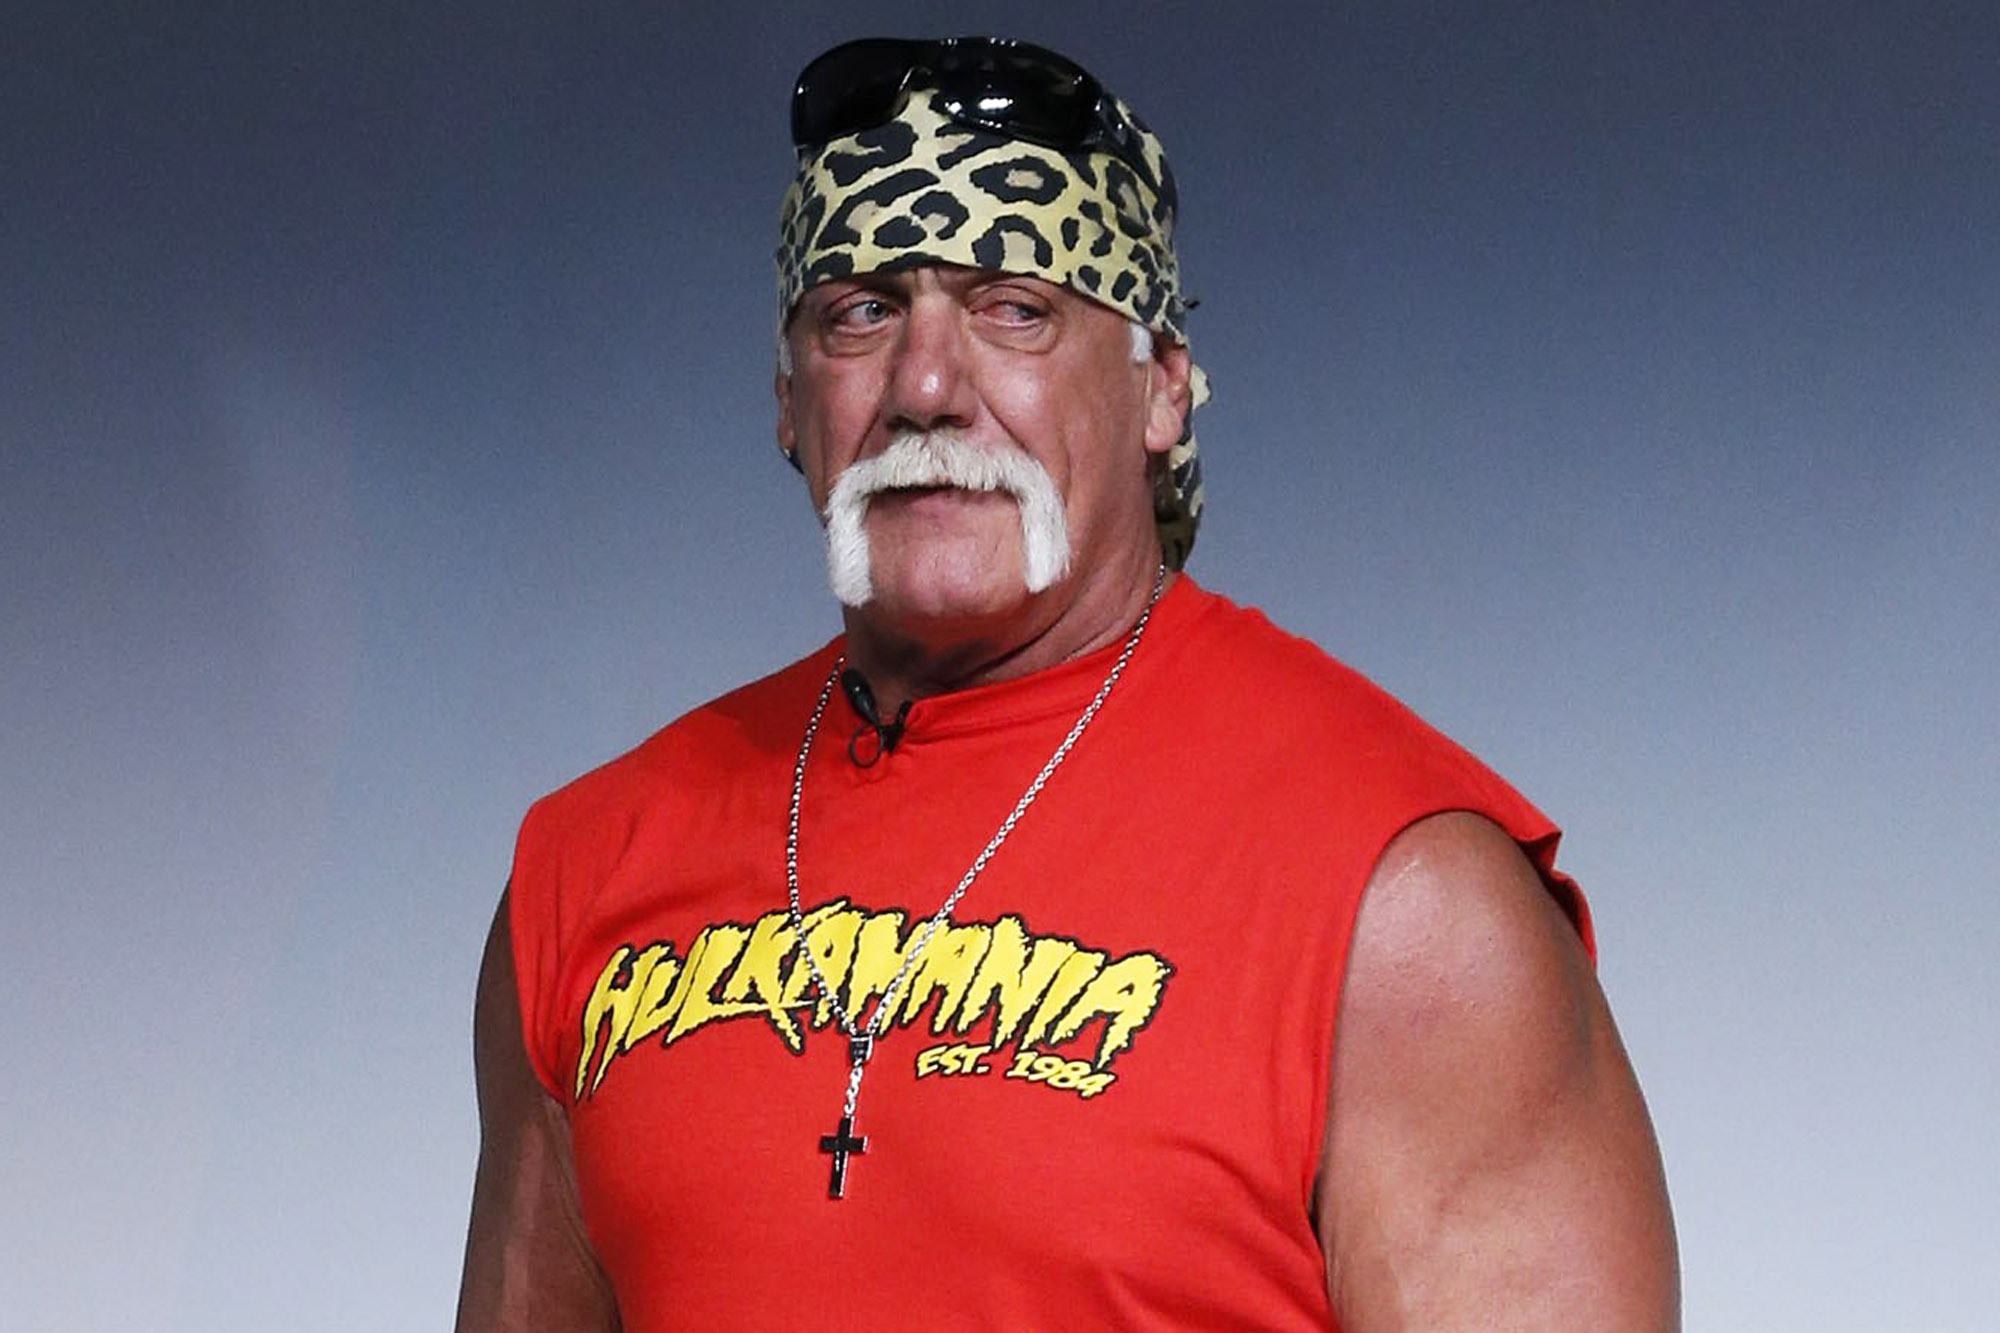 Hulk Hogan says he hit rock bottom after his reality show was canceled. Photo: Everett Collection